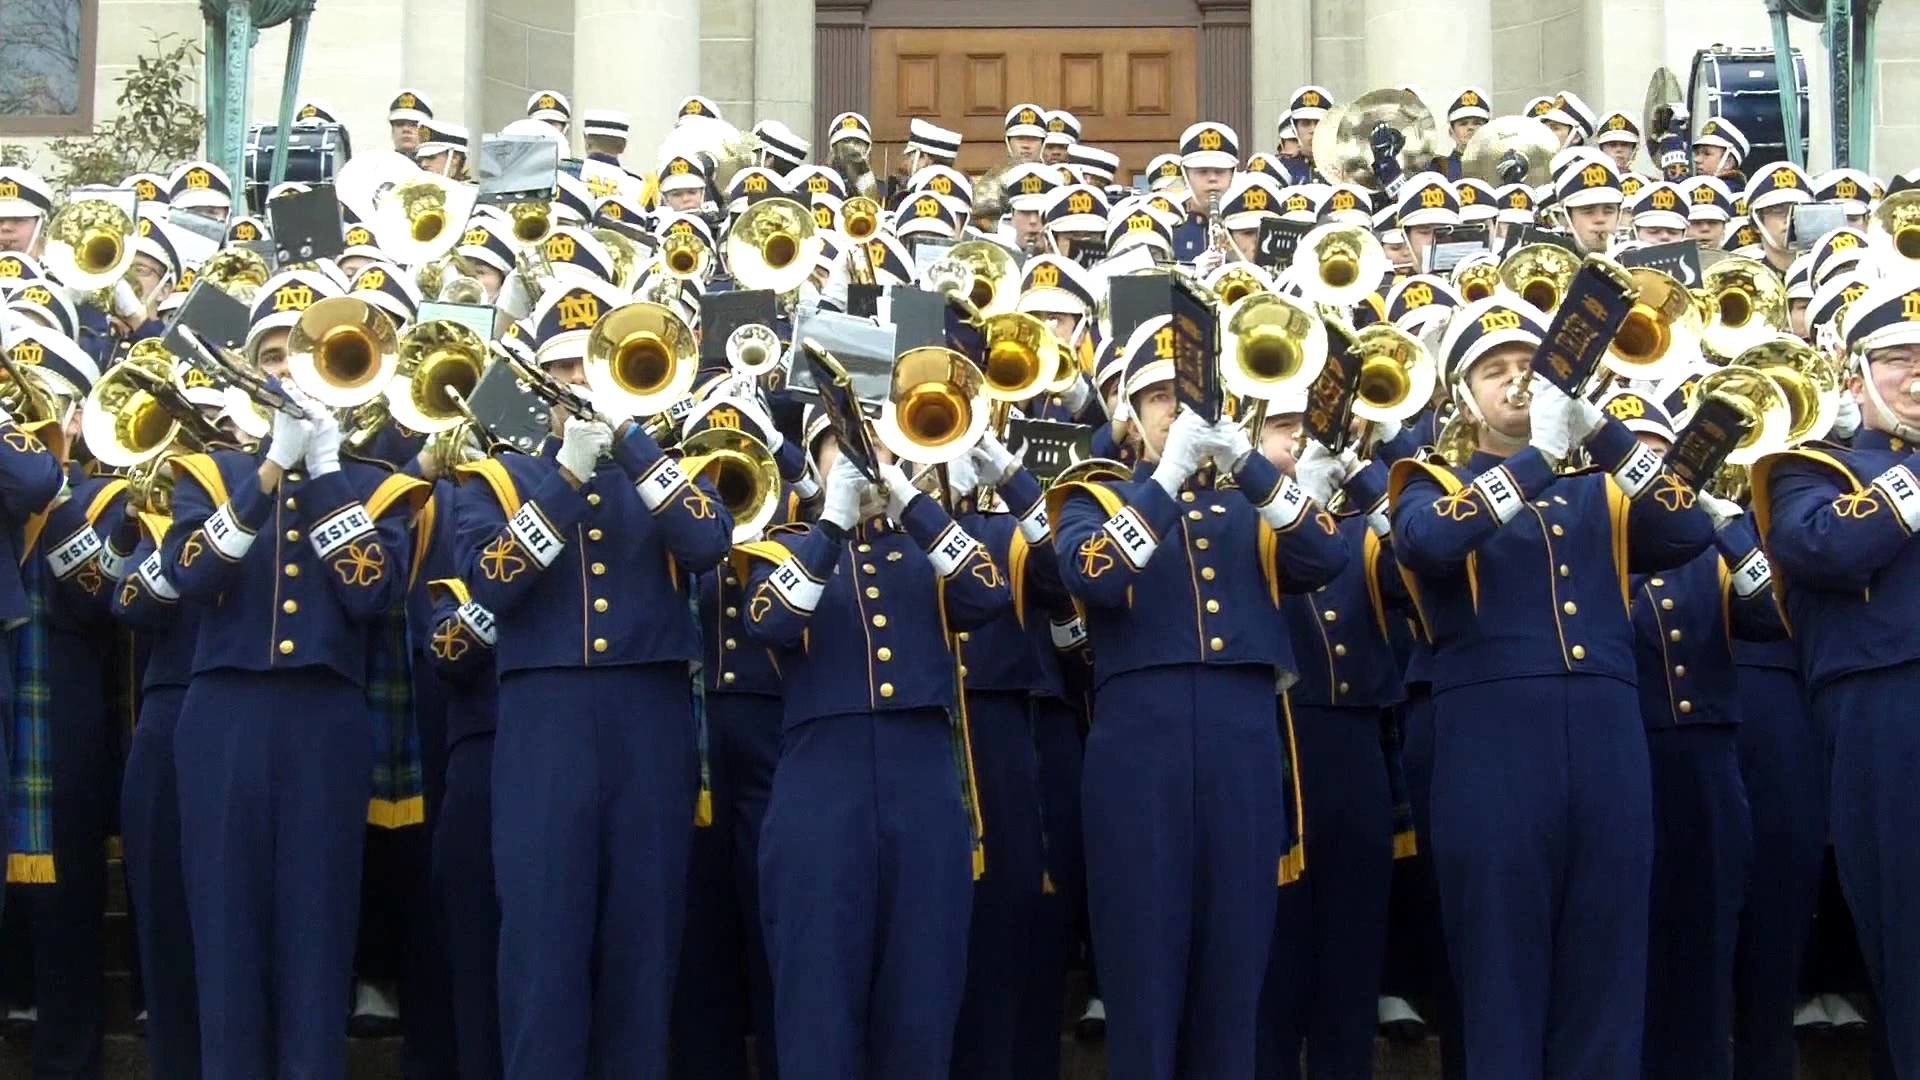 1920x1080 Good Time - Carly Rae Jepsen Owl City - Notre Dame Marching Band